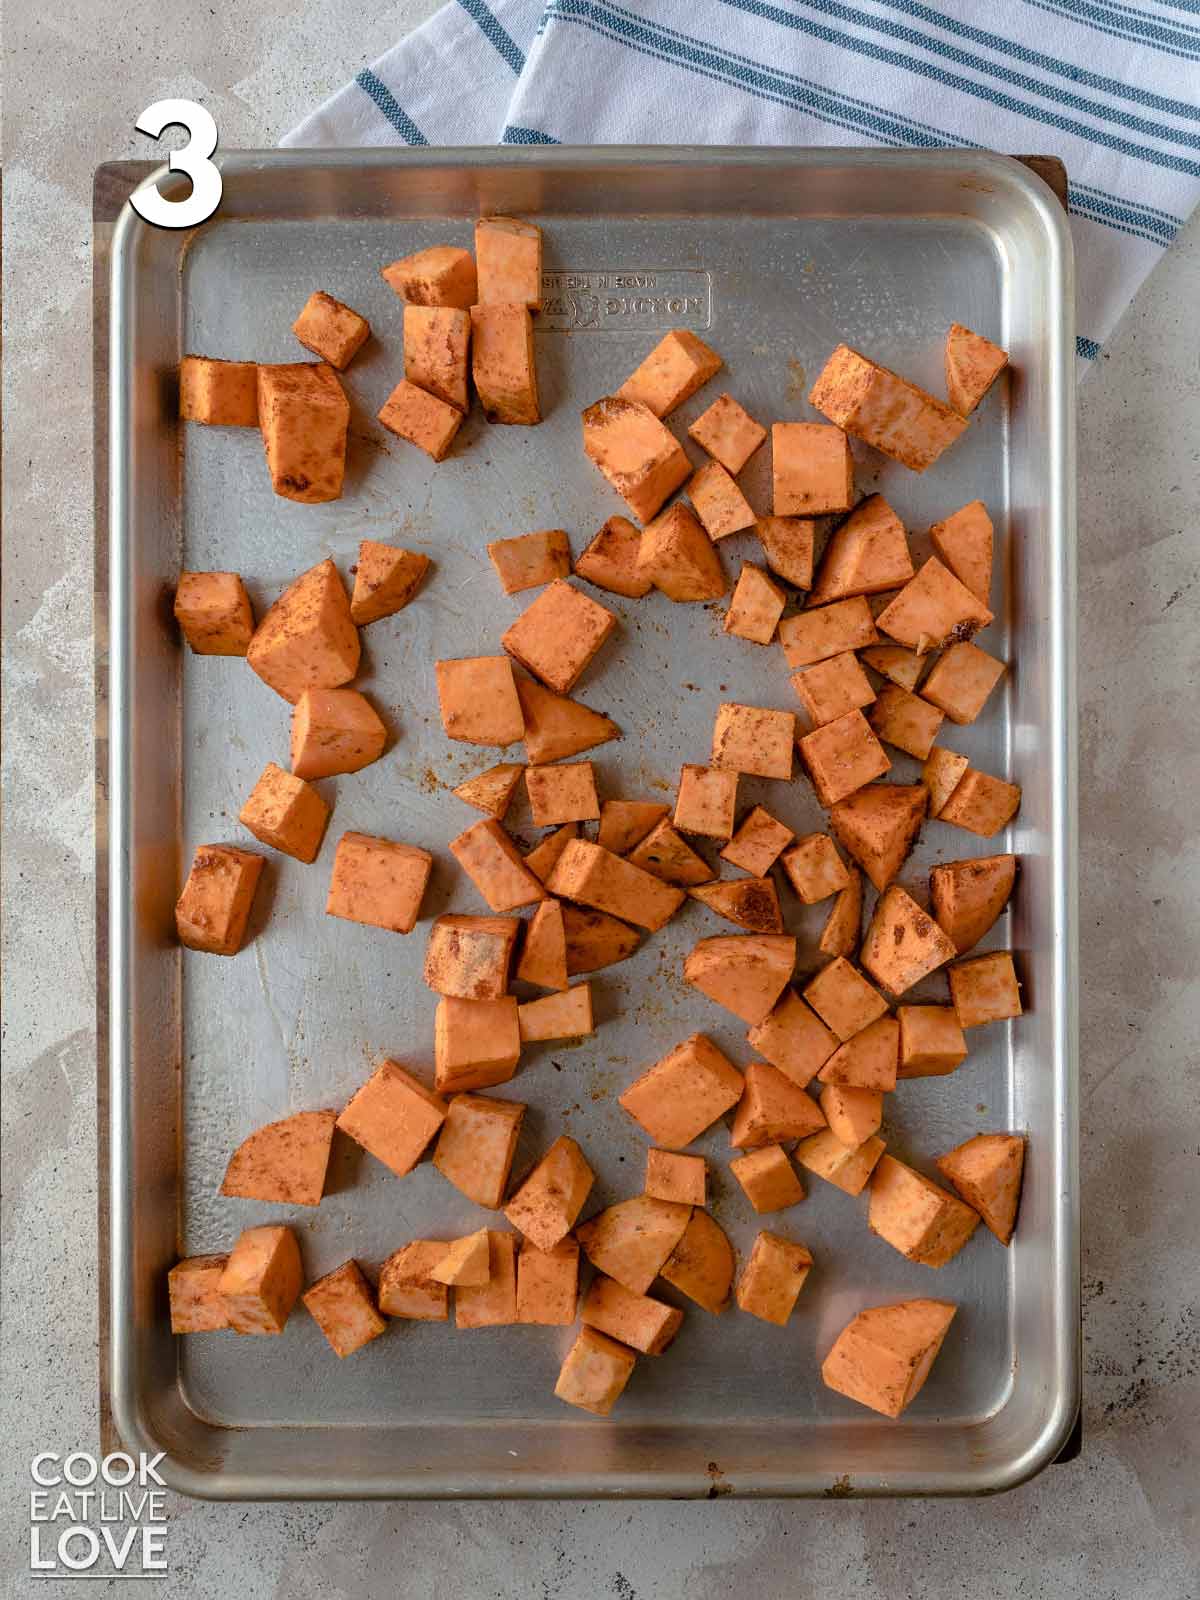 Sweet potatoes are spread out on a baking sheet.